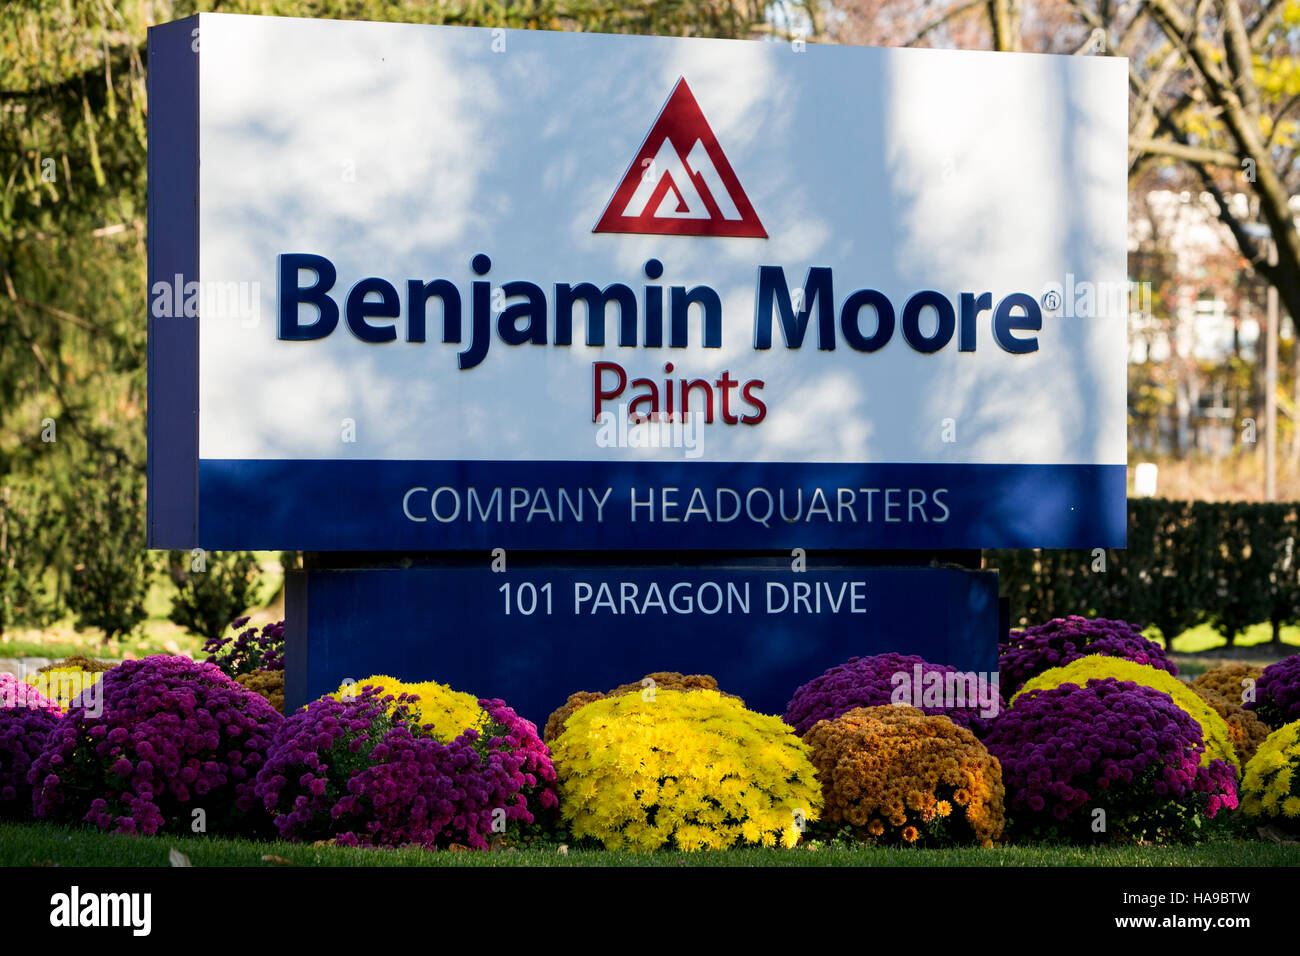 A logo sign outside of the headquarters of Benjamin Moore Paints in Montvale, New Jersey on November 5, 2016. Stock Photo